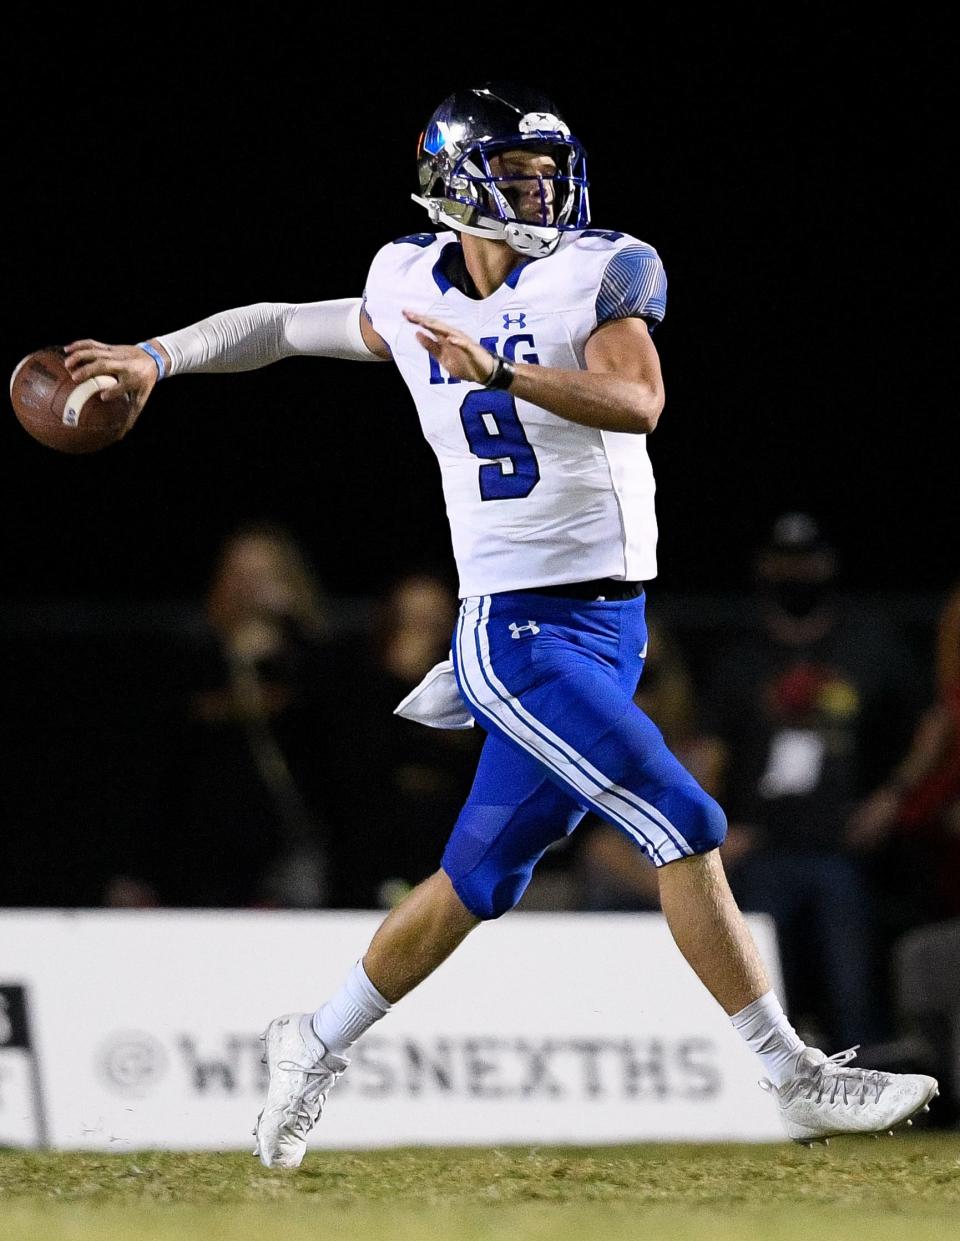 IMG Academy's JJ Mccarthy (9) throws against Ravenwood during the first half at Ravenwood High School in Brentwood, Tenn., Friday, Sept. 25, 2020.